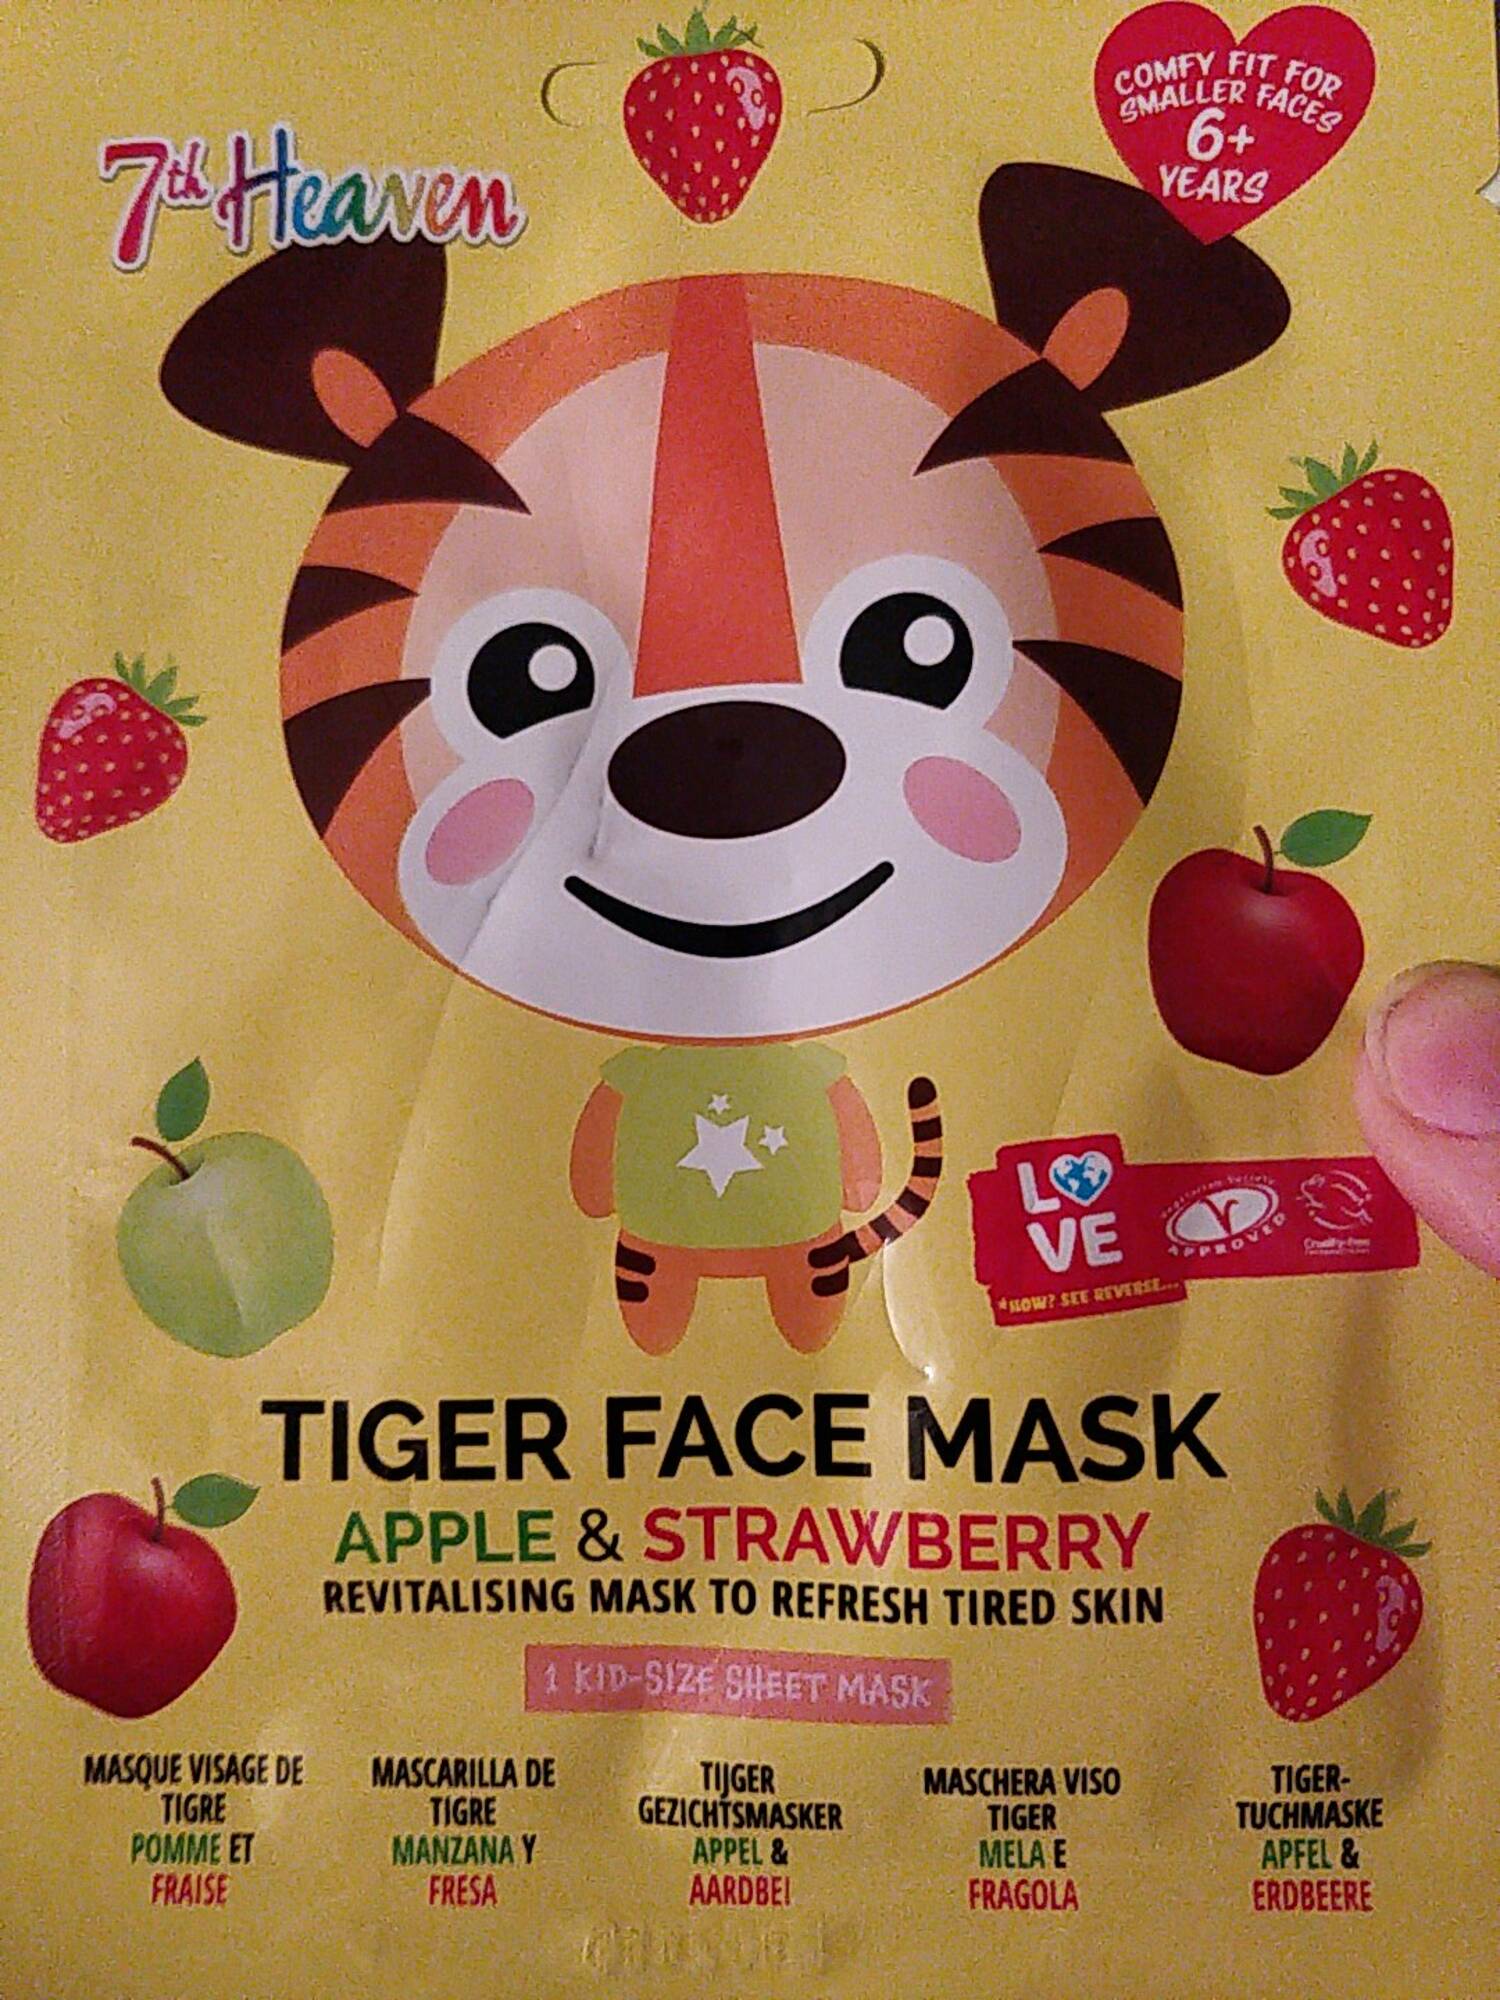 7TH HEAVEN - Tiger face mask apple & strawberry